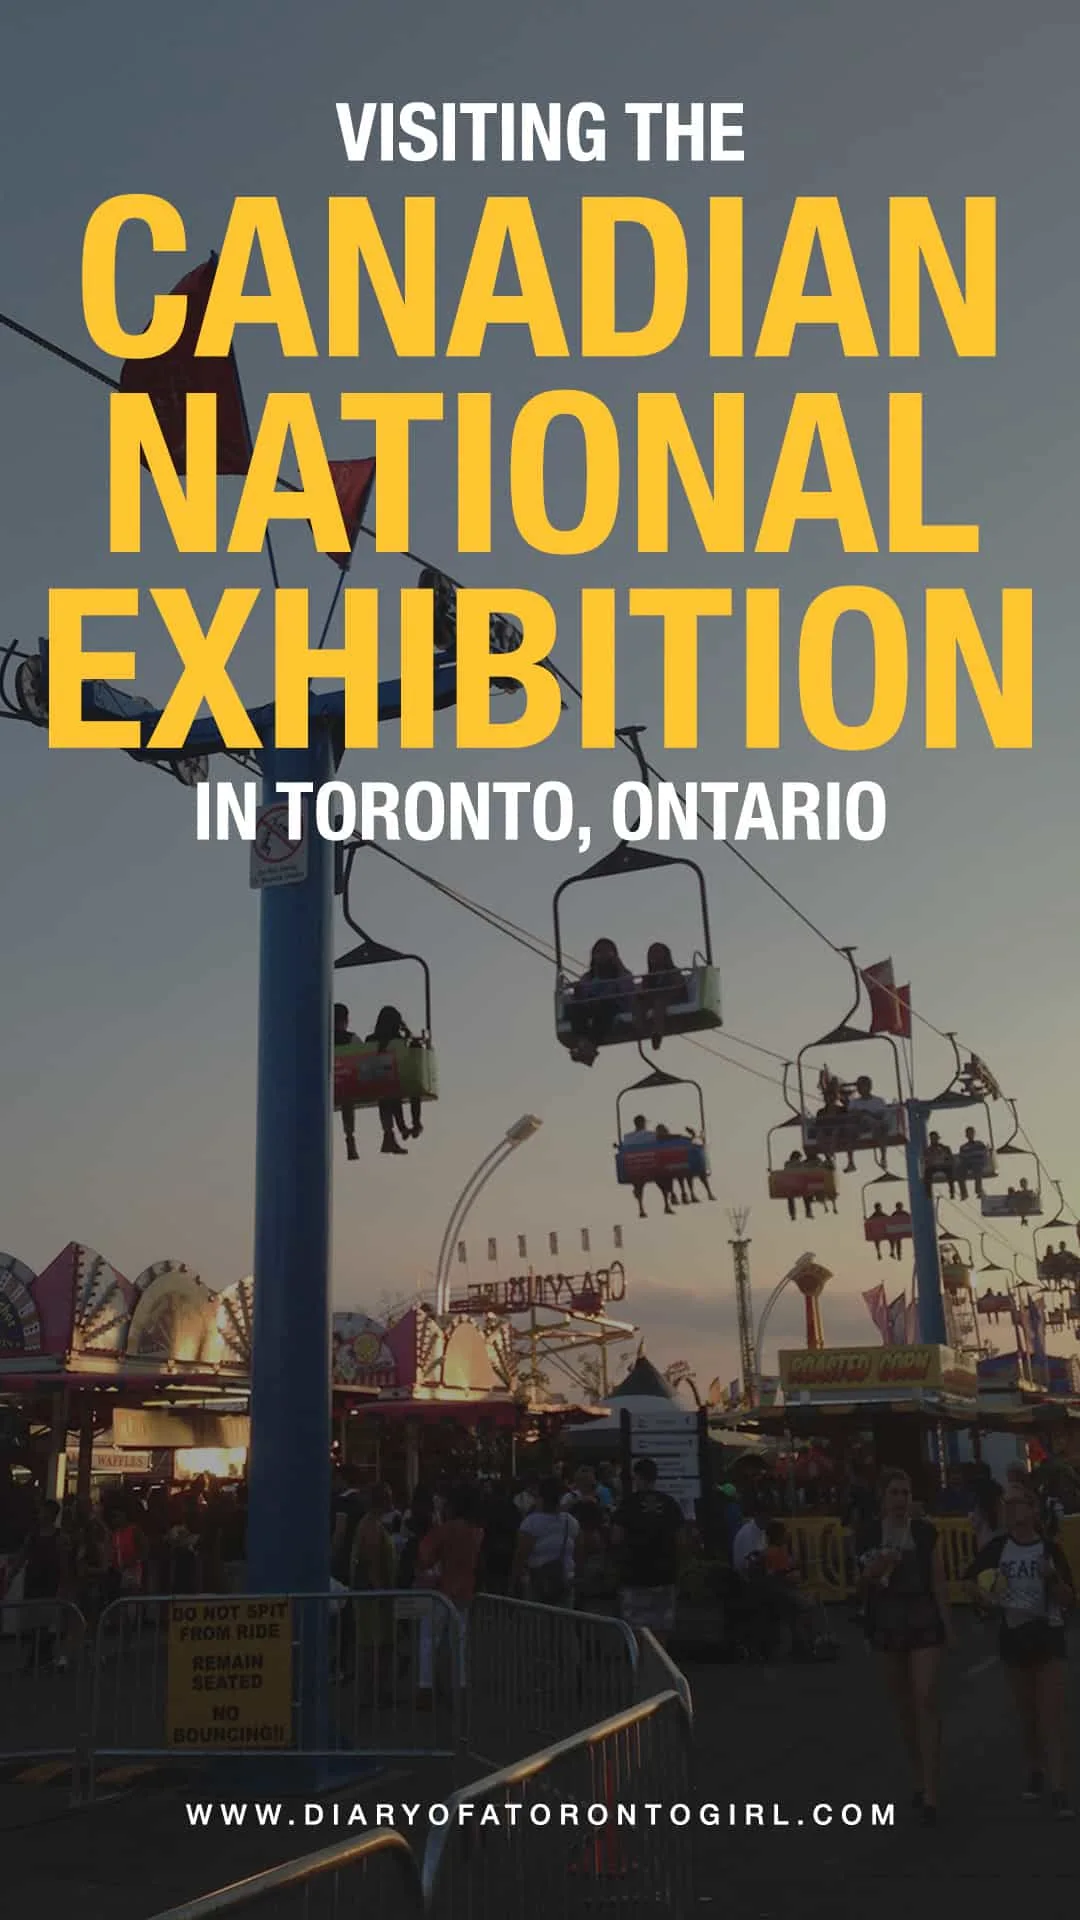 Curious about the weird foods at the CNE this year? Here are crazy things you need to try at the Canadian National Exhibition in Toronto, including cricket-covered hot dogs and bacon-topped ice cream.